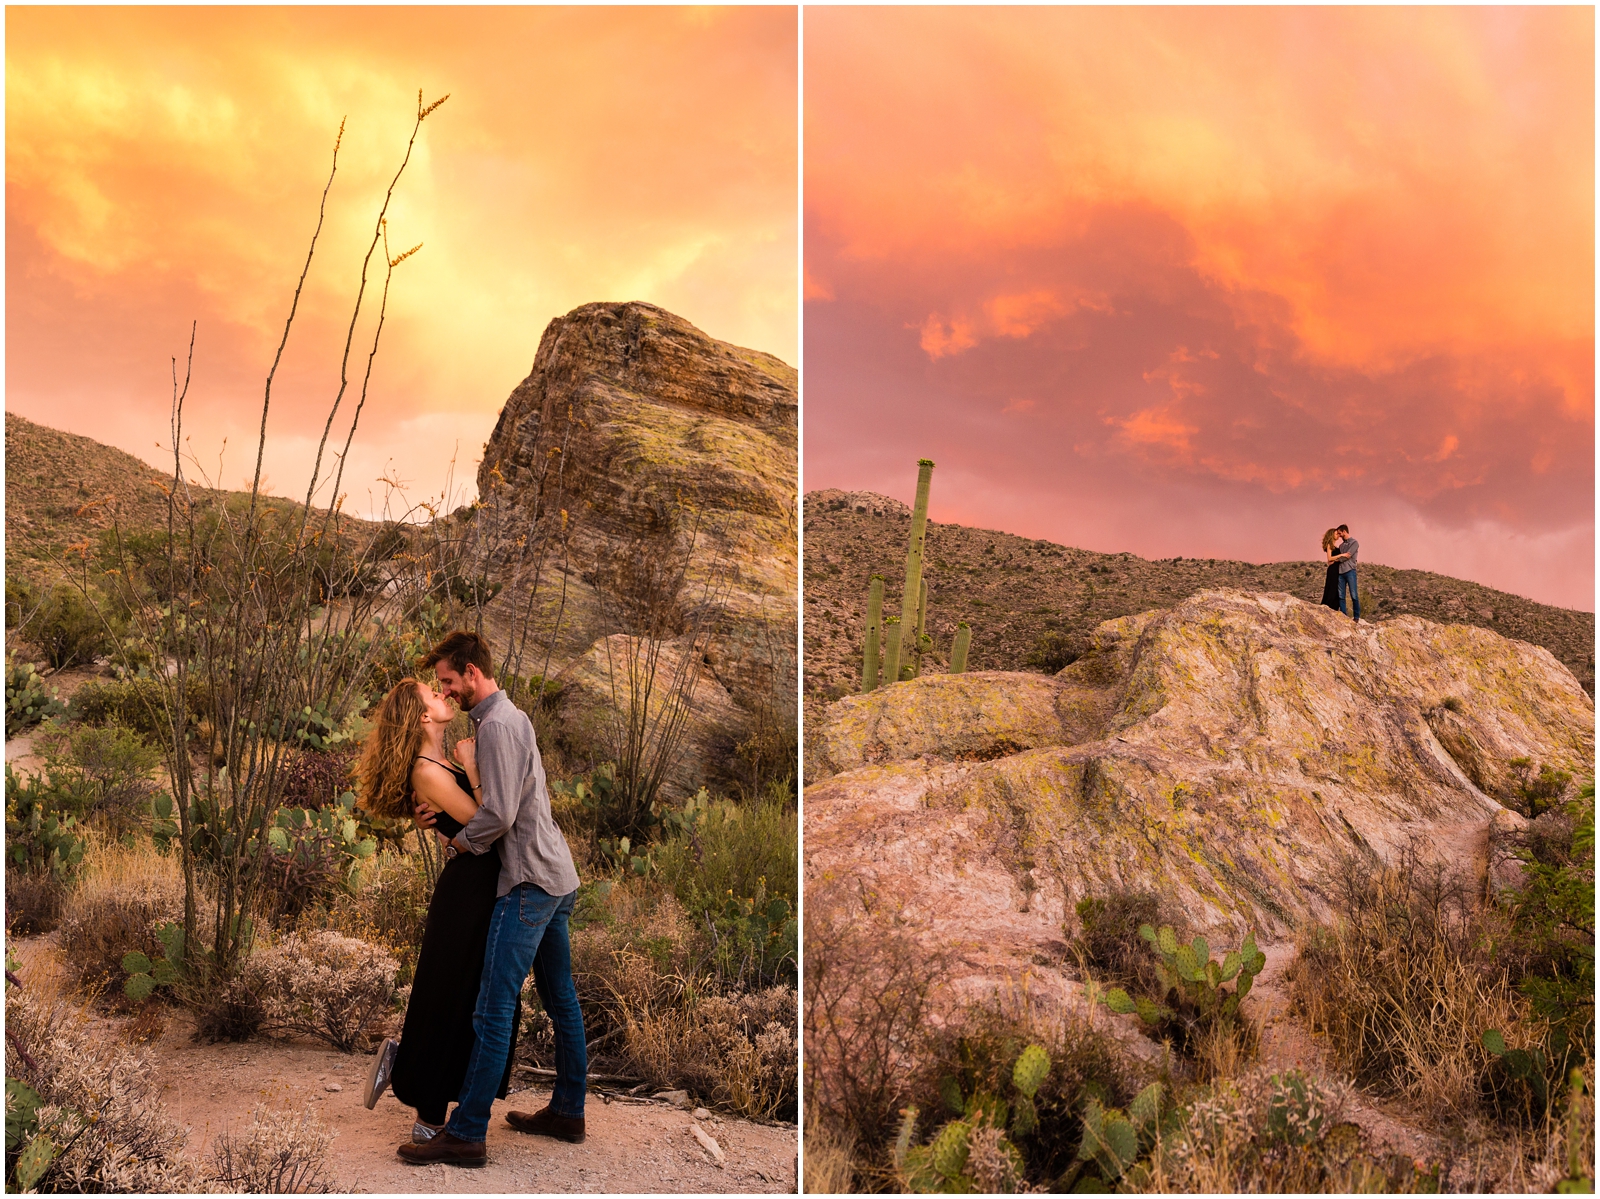 Epic sunset and snuggles for this couple during their Arizona adventure session with Clarissa Wylde Photography! 